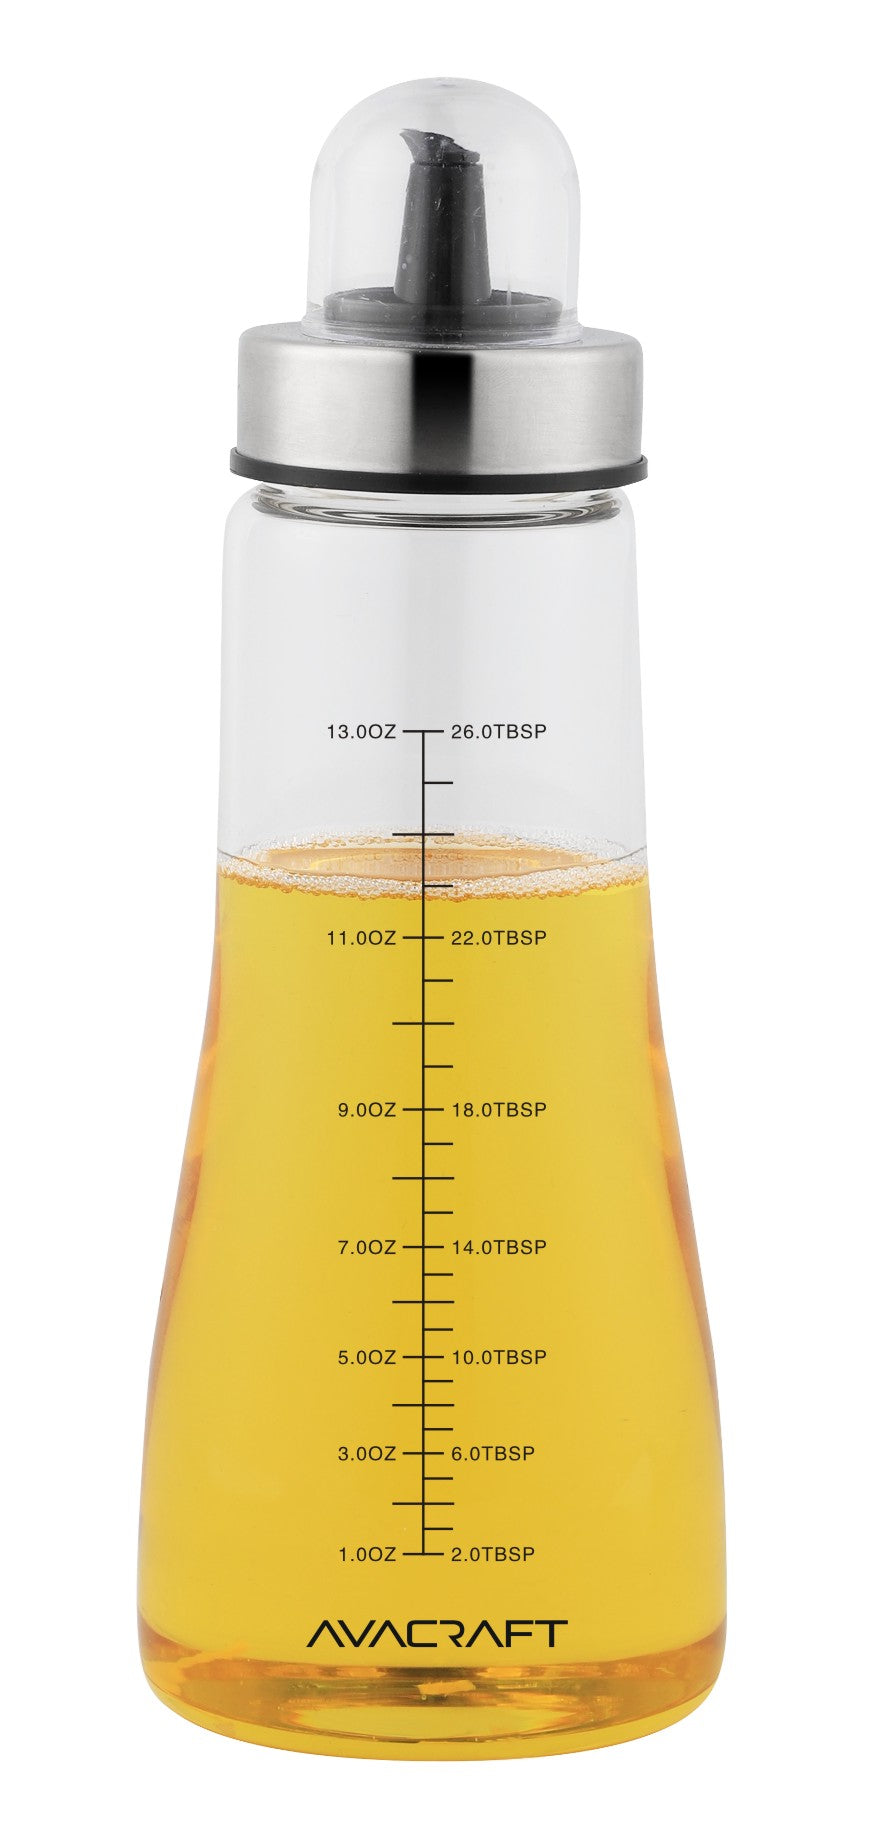 AVACRAFT Glass Olive Oil Dispenser Bottle with Leakproof Pour Spout and Measurement Marks on The Oil Container for Healthy